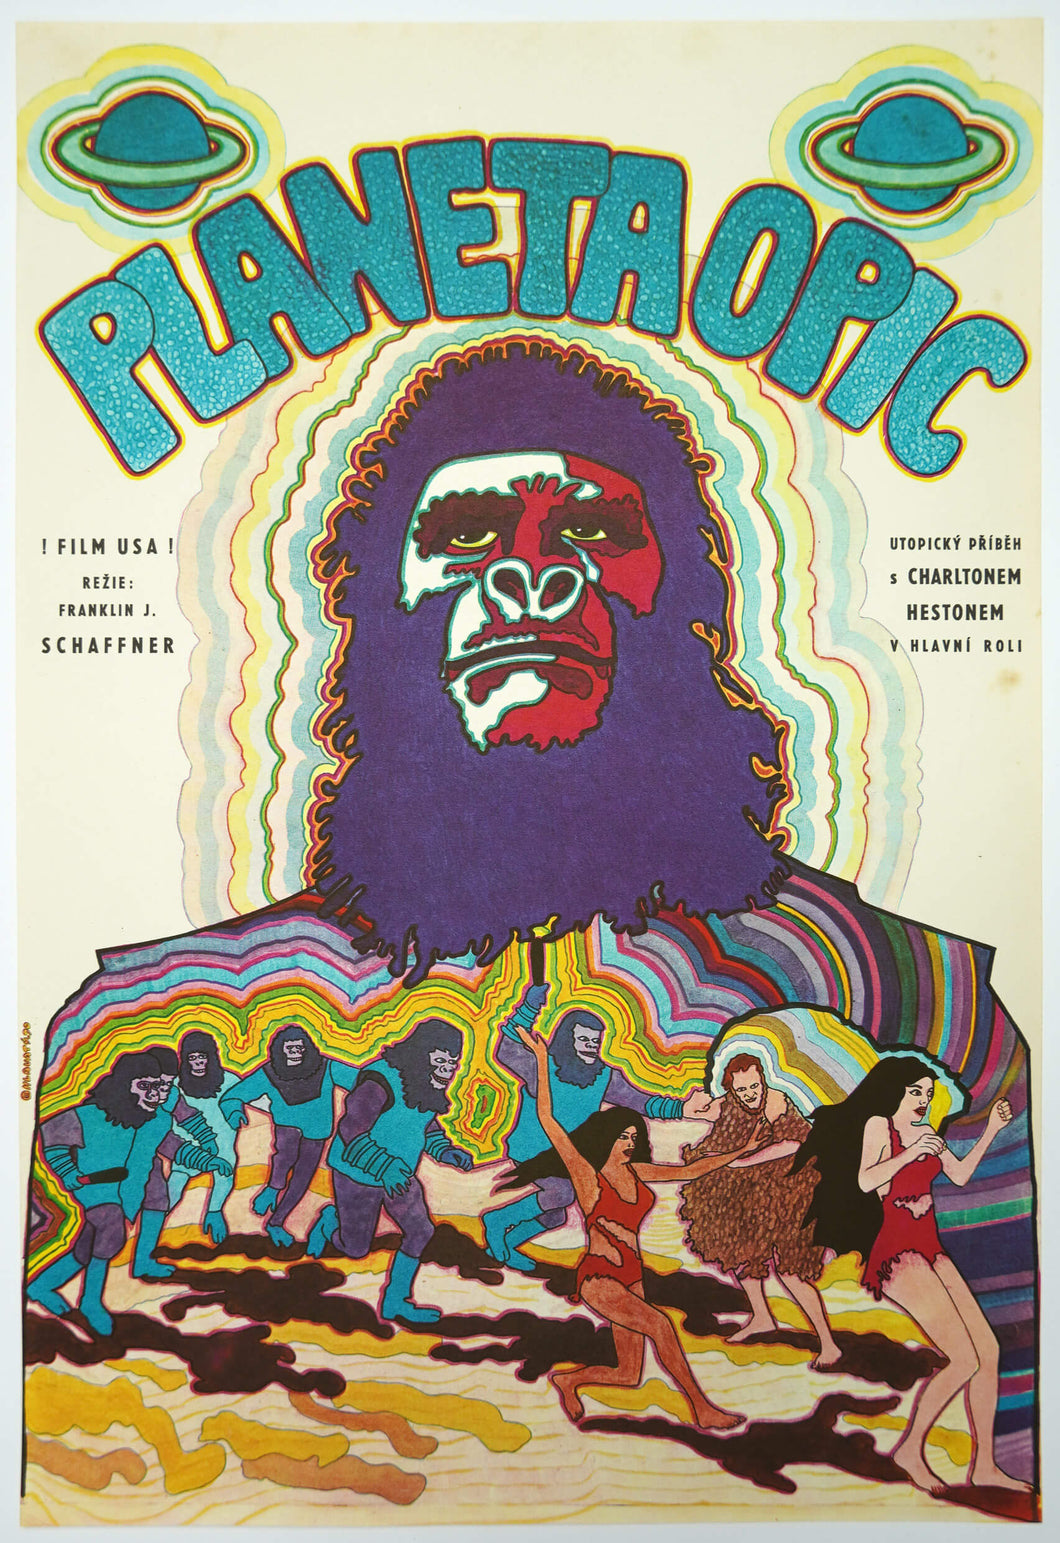 Planet of the Apes Czech Poster psychedelic image of apes and humans - czechpostergallery.com